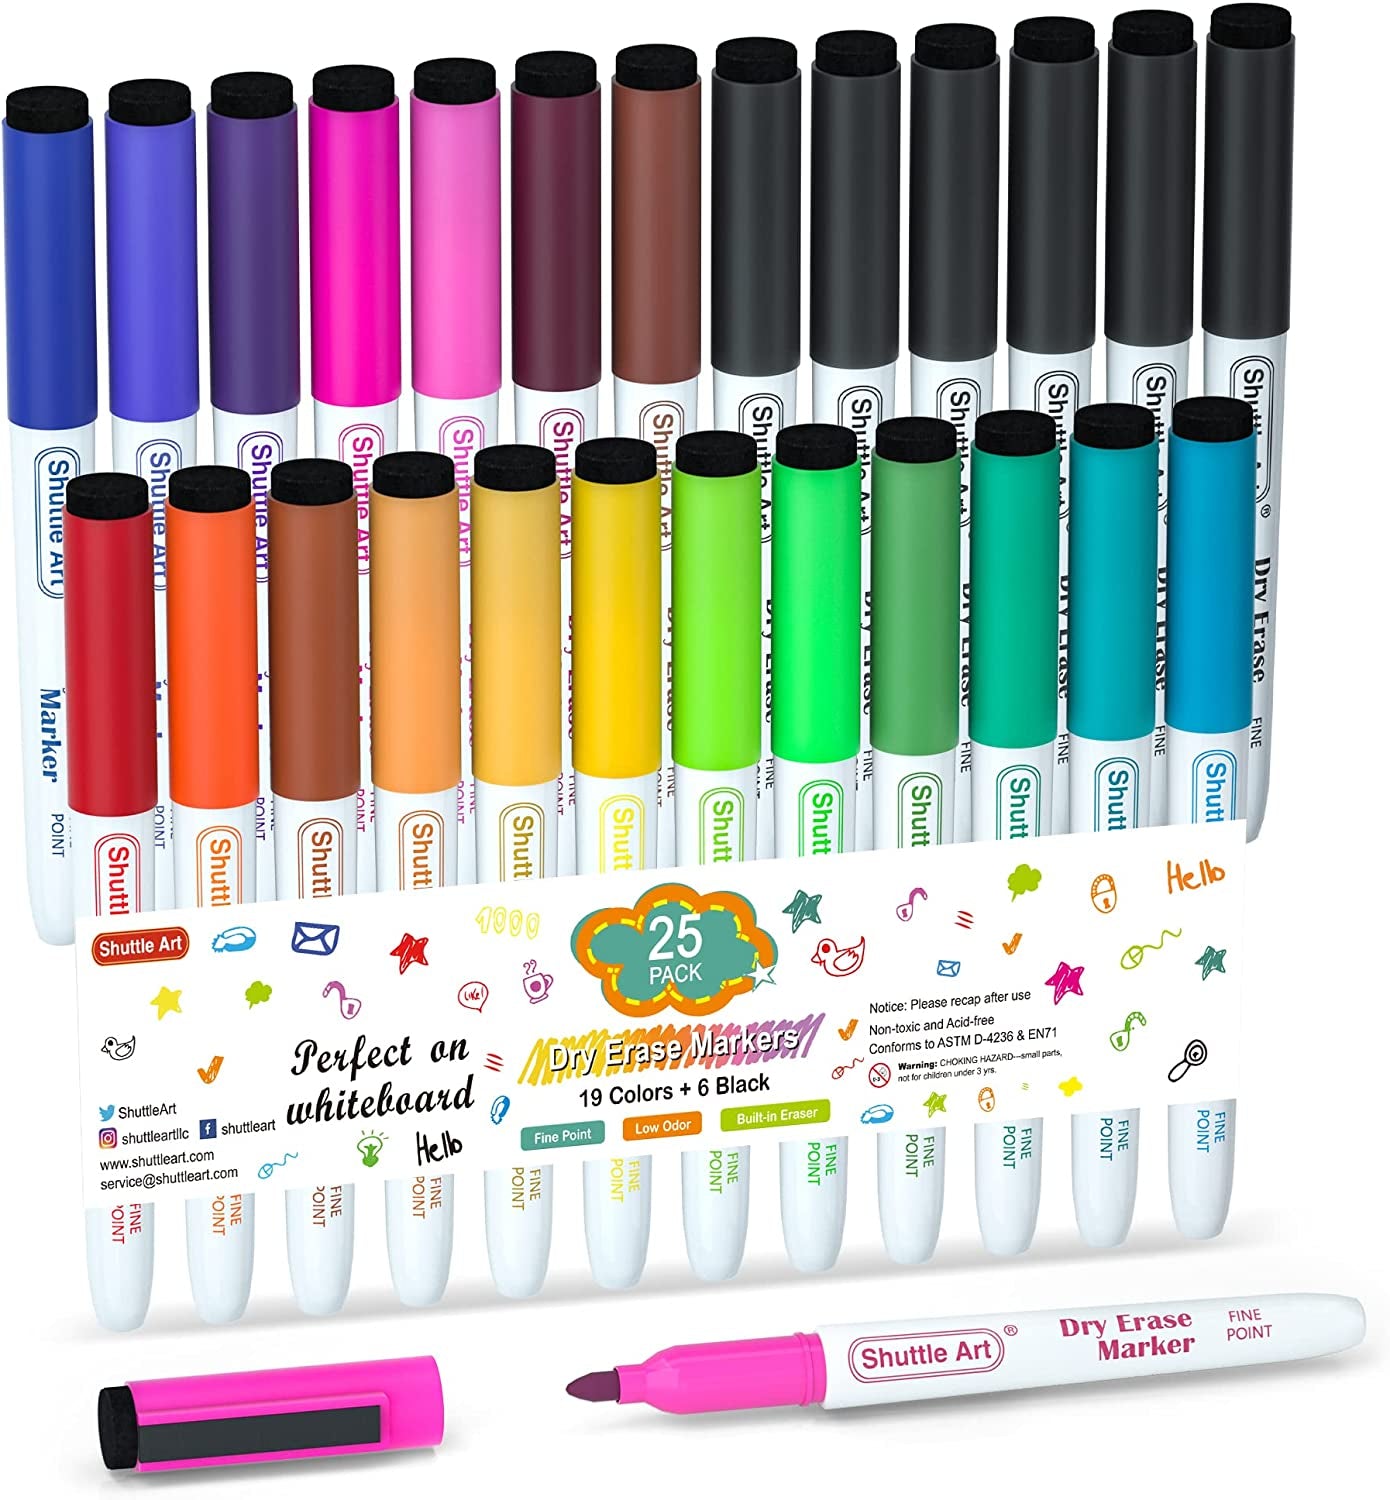 Dry Erase Markers, 15 Colors Magnetic Whiteboard Markers with Erase,Fine Point Perfect for Writing on Whiteboards, Dry-Erase Boards,Mirrors for School Office Home